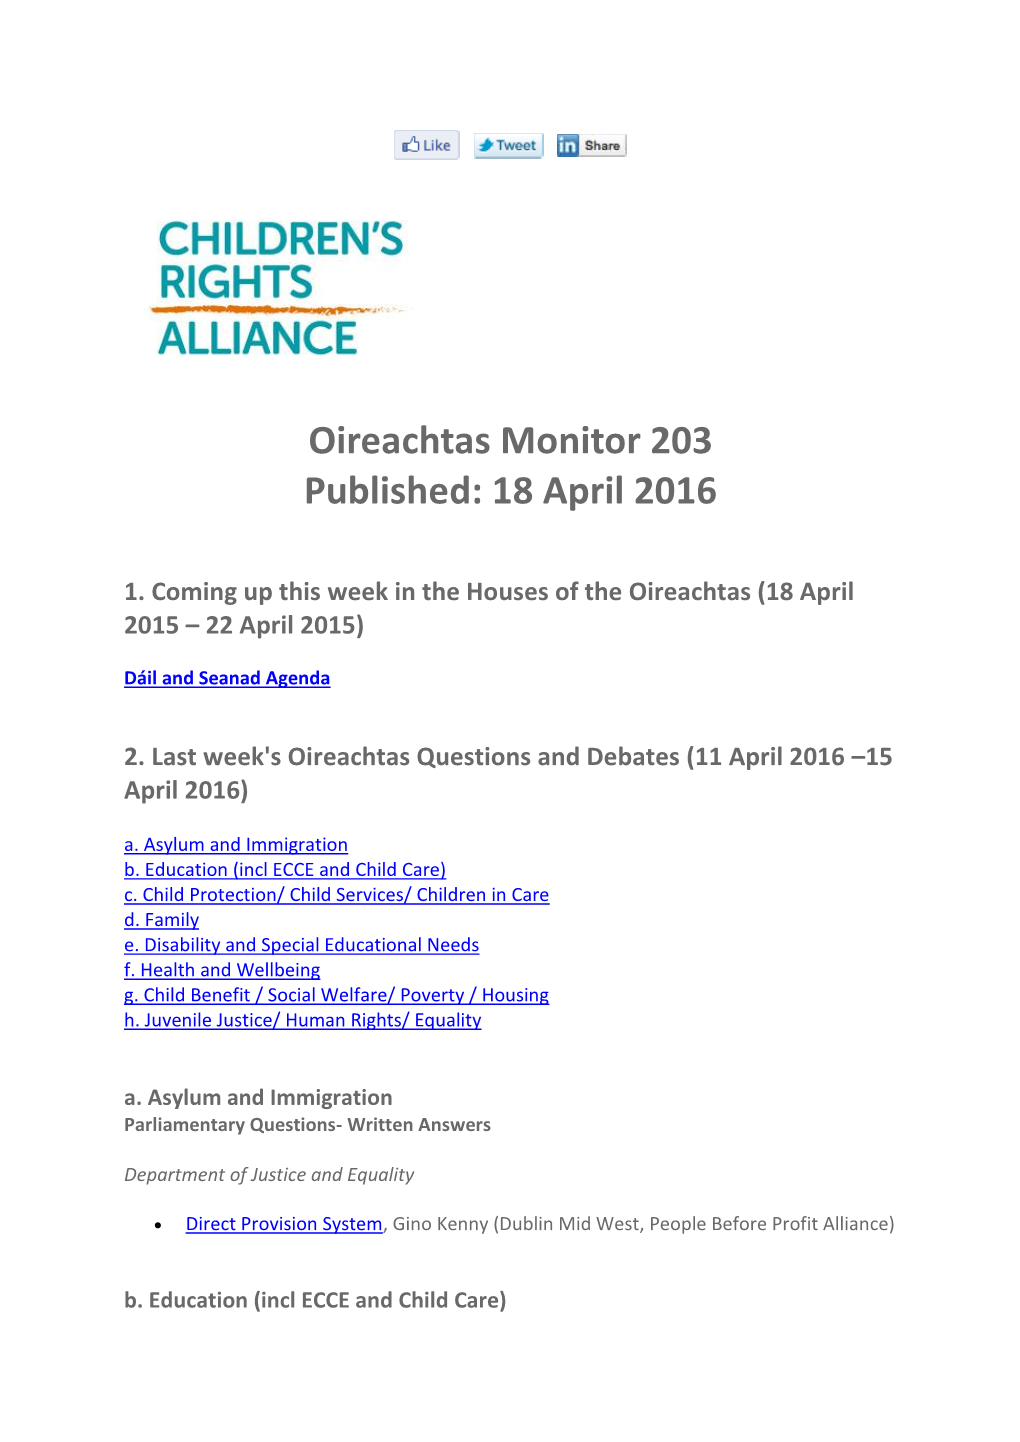 Oireachtas Monitor 203 Published: 18 April 2016